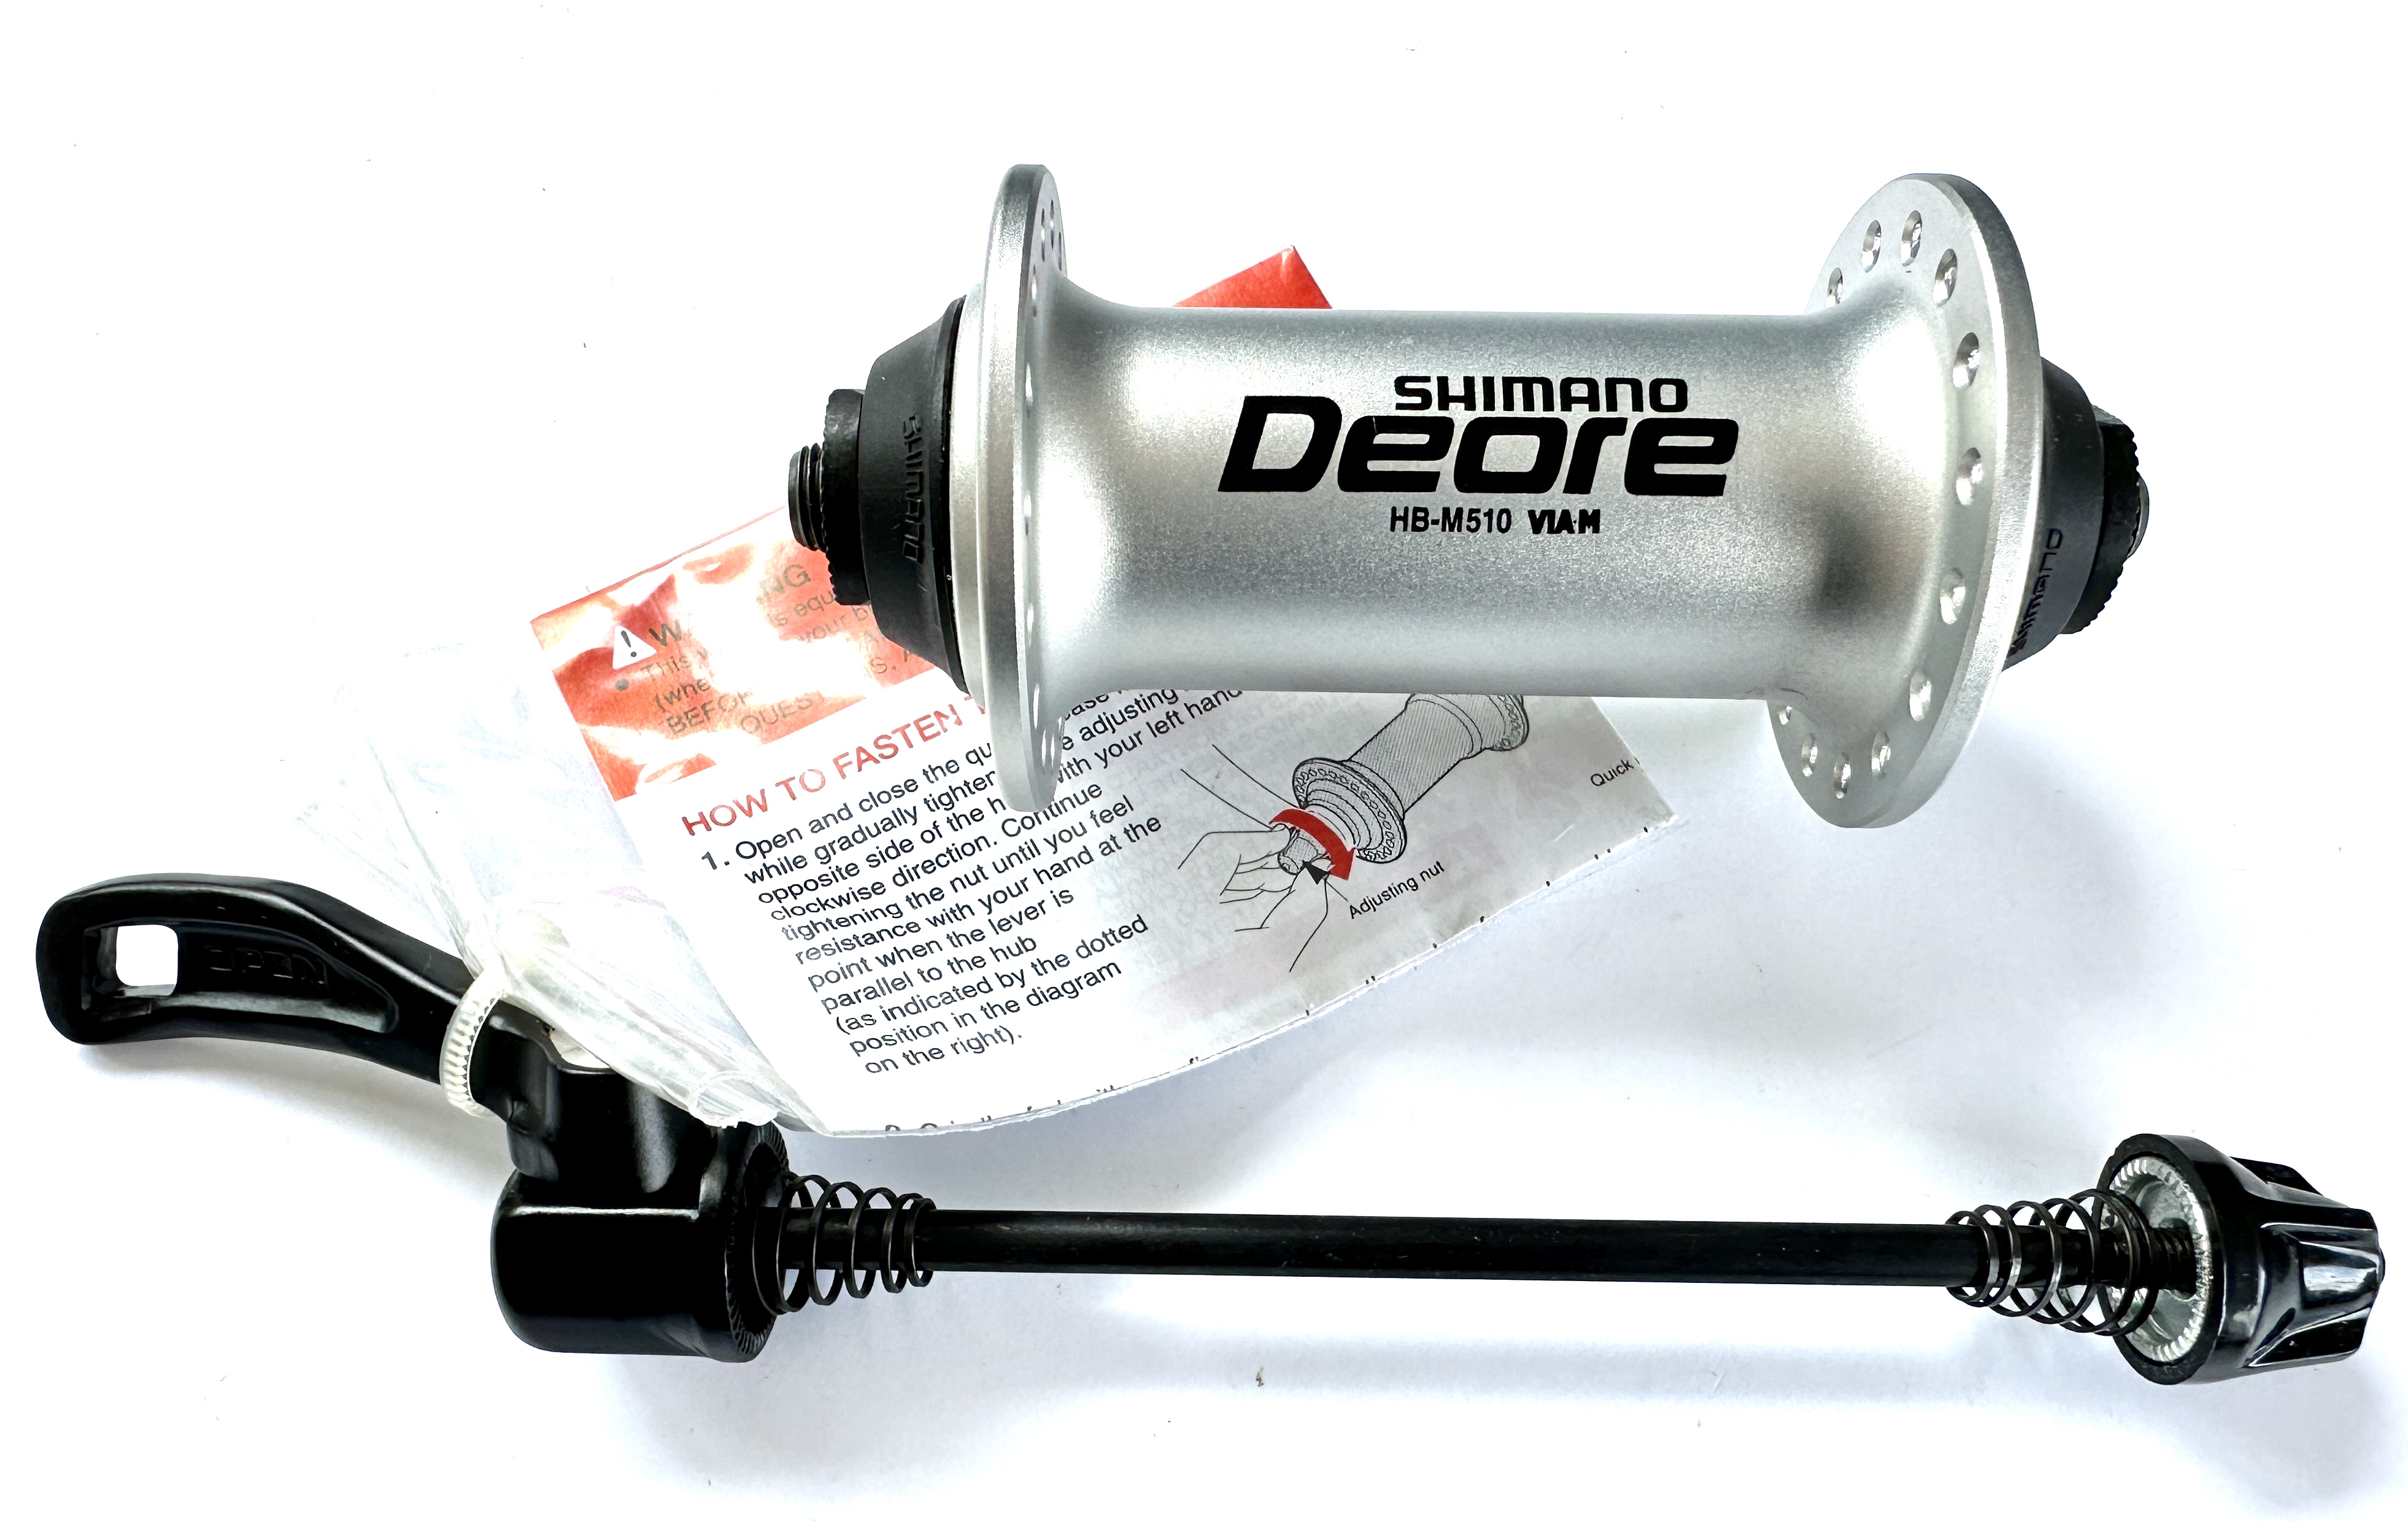 Shimano Deore HB-M510 front hub 32-hole, silver